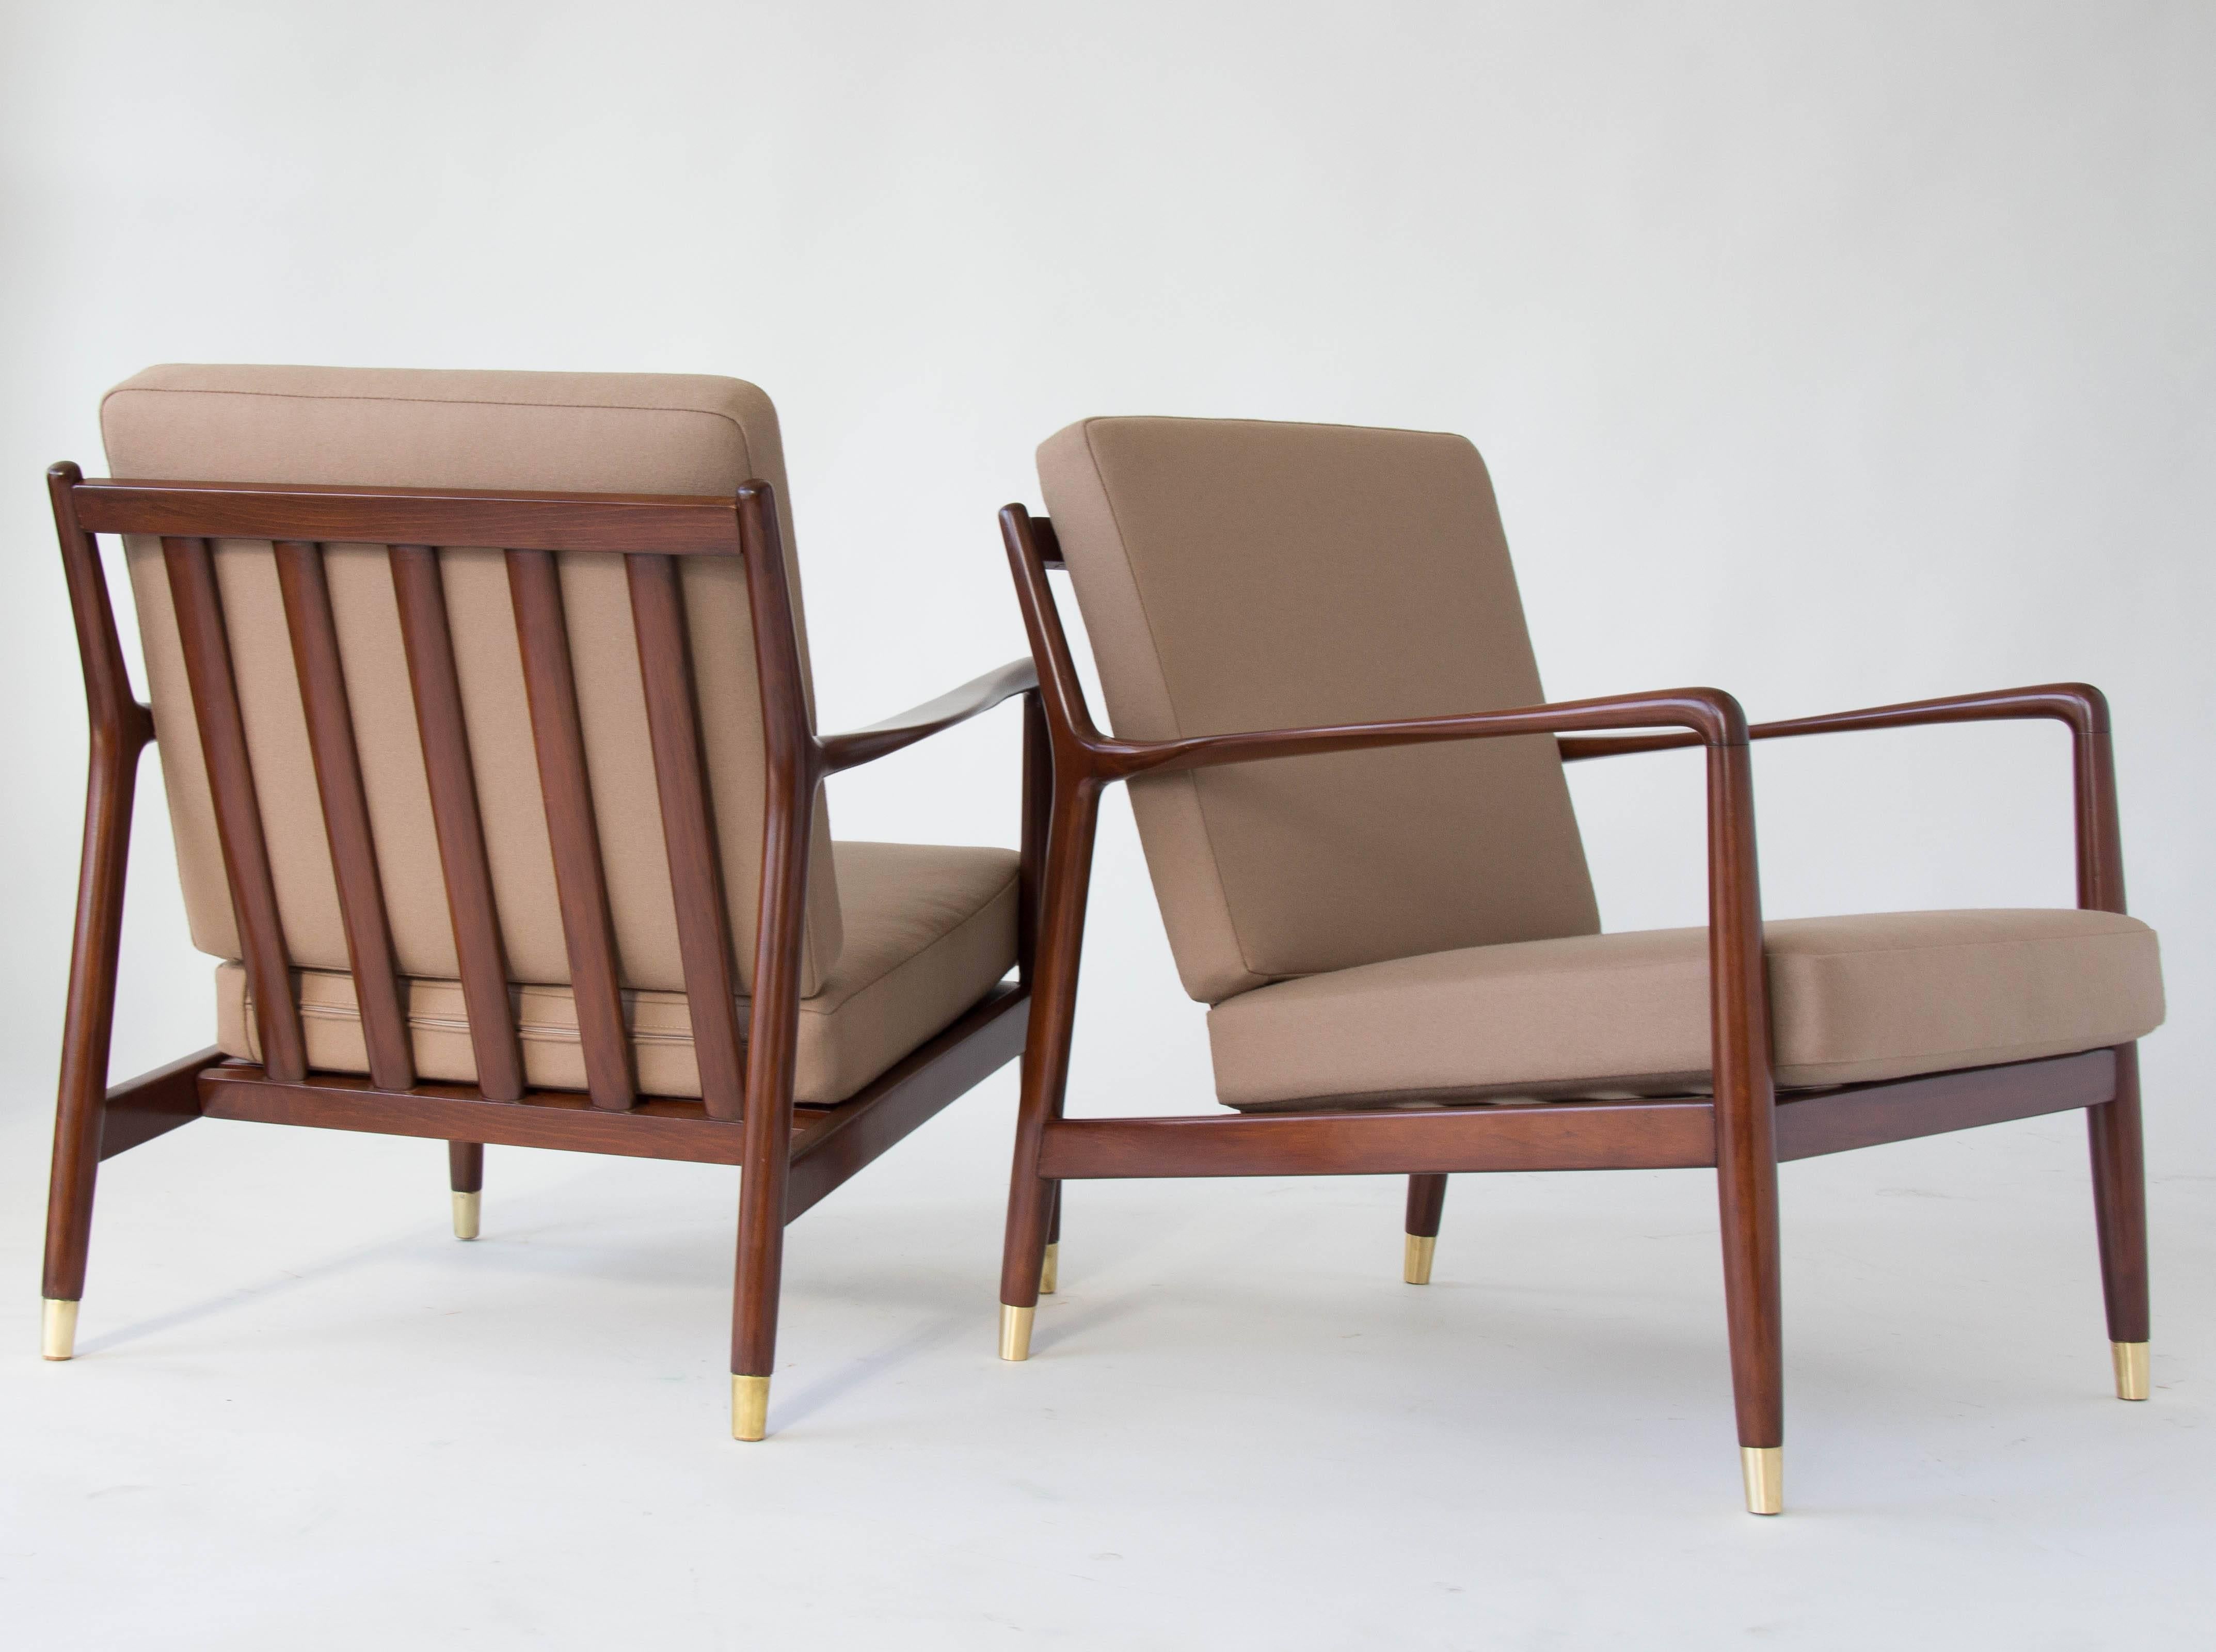 Pair of Lounge Chairs with Brass-Capped Legs by Folke Ohlsson for DUX 1